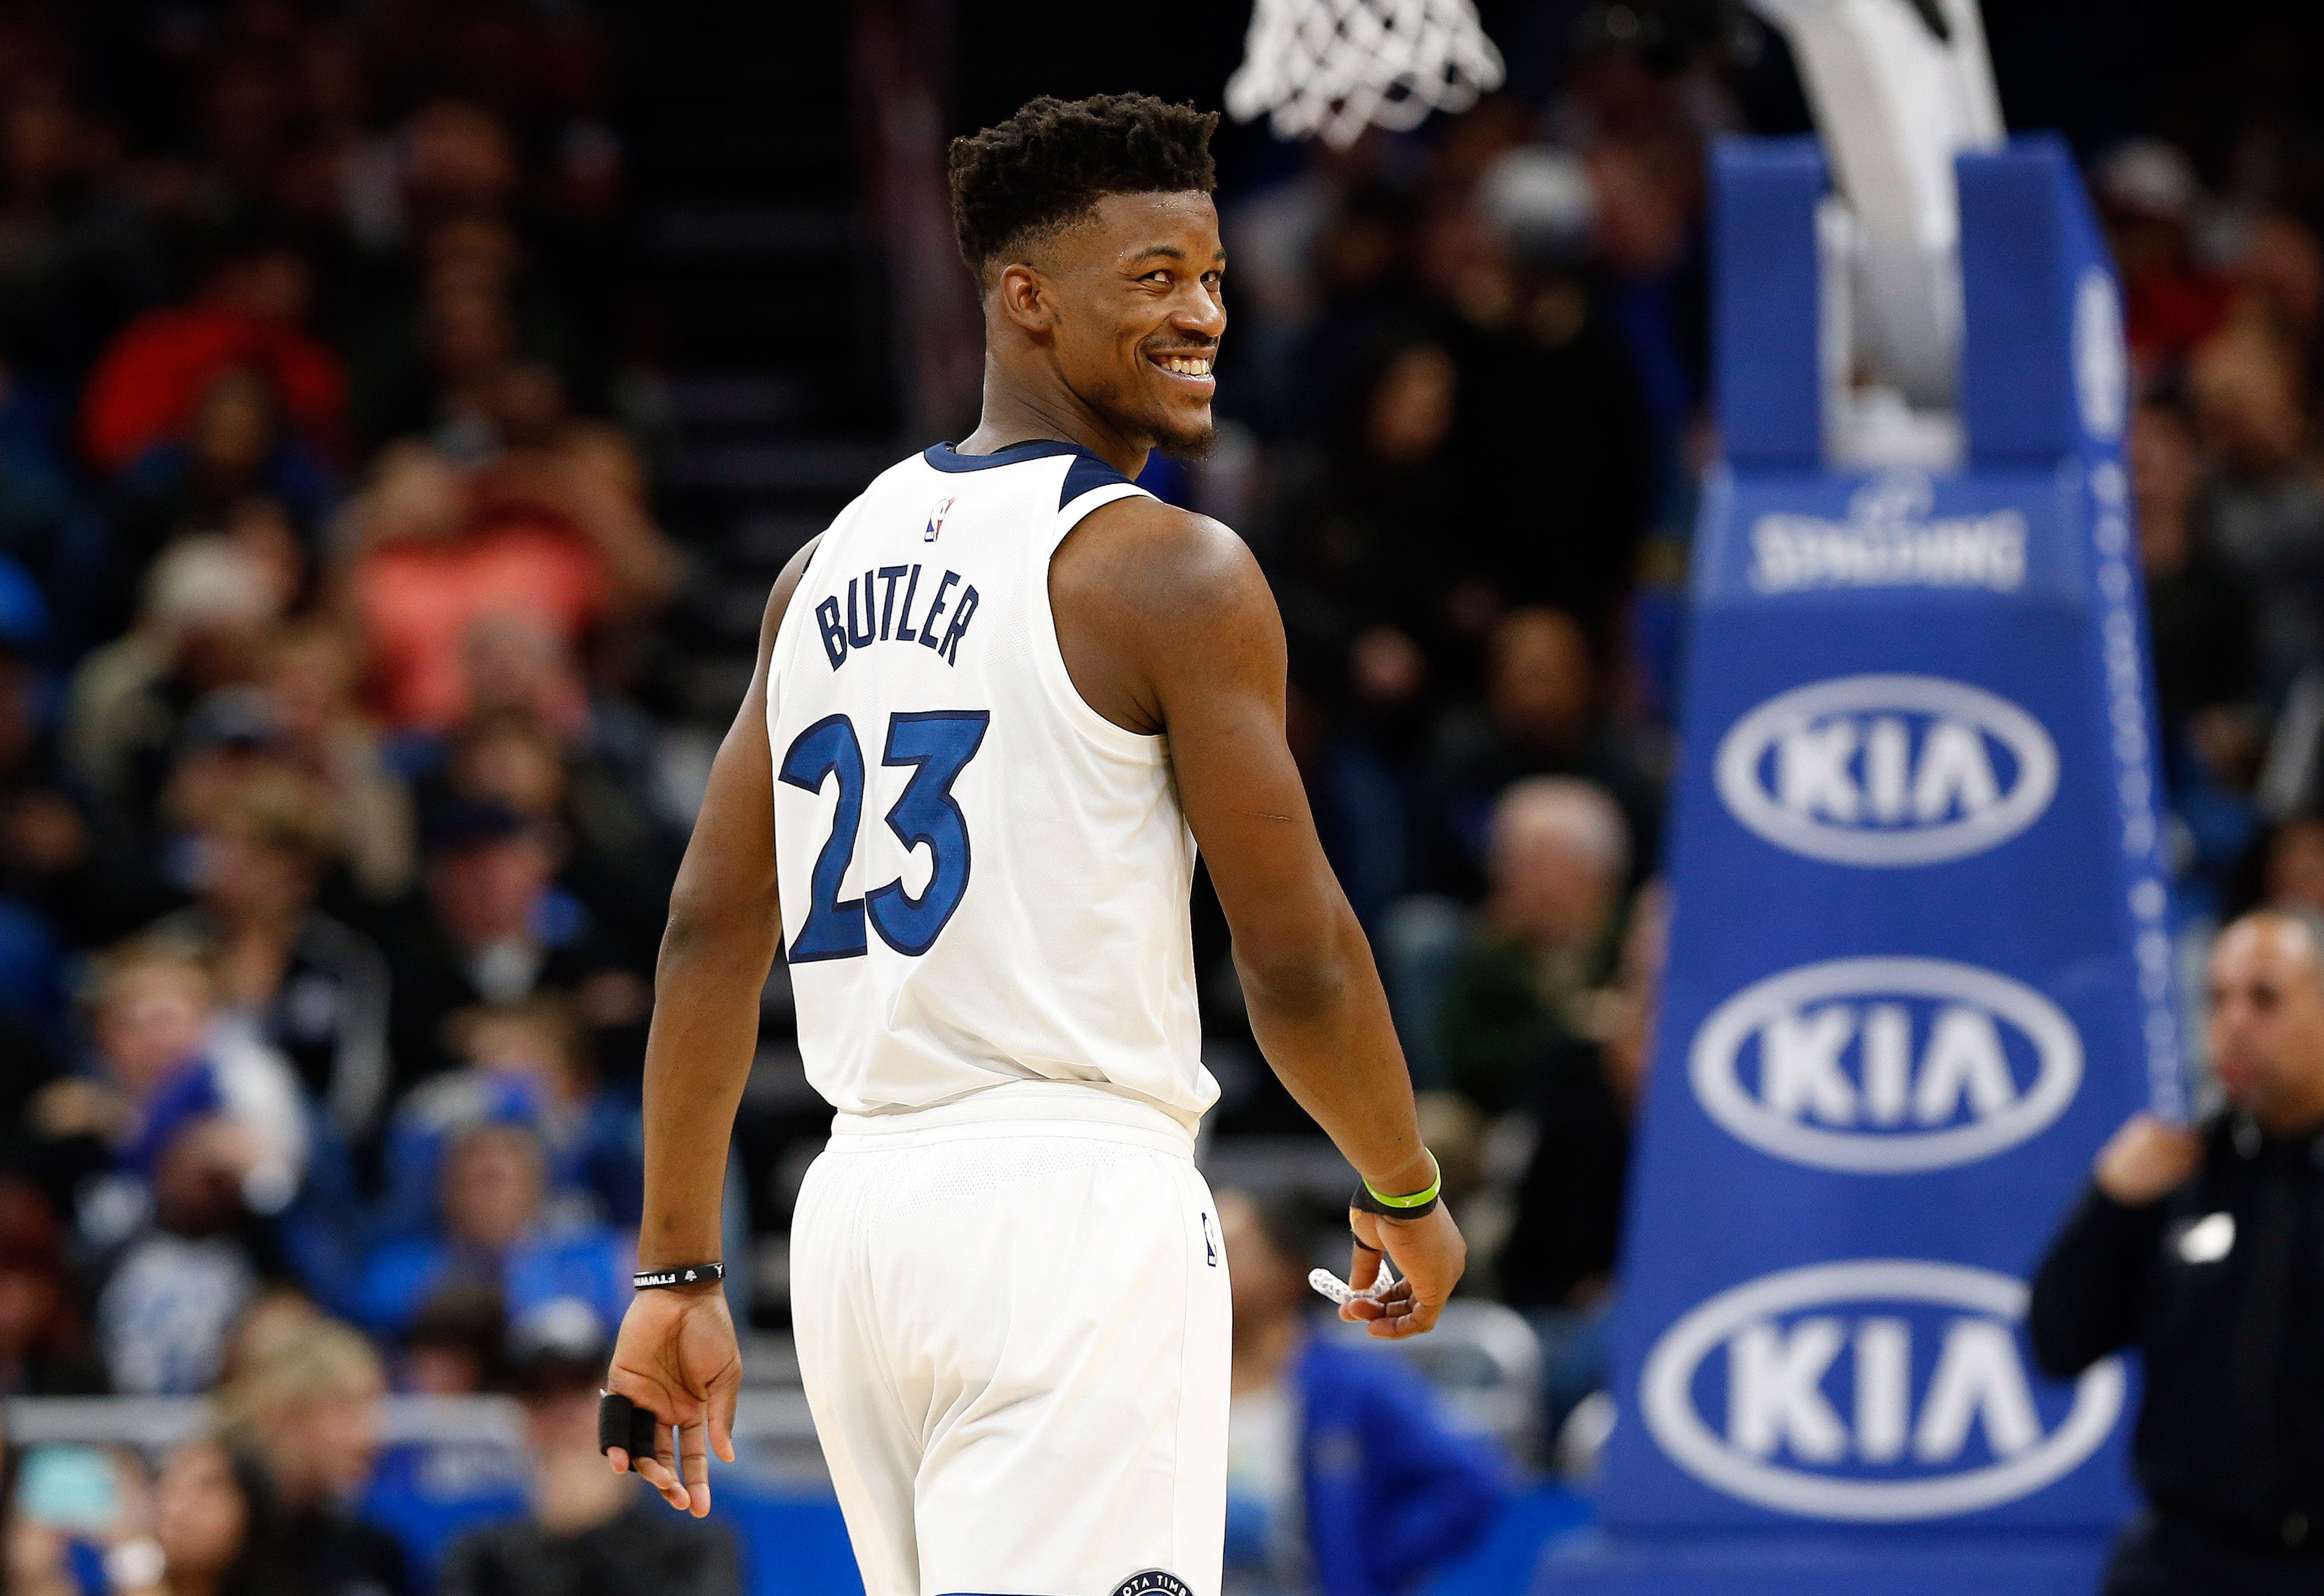 NBA star Jimmy Butler pays up — and then some — after fan charges $20 for fantasy league